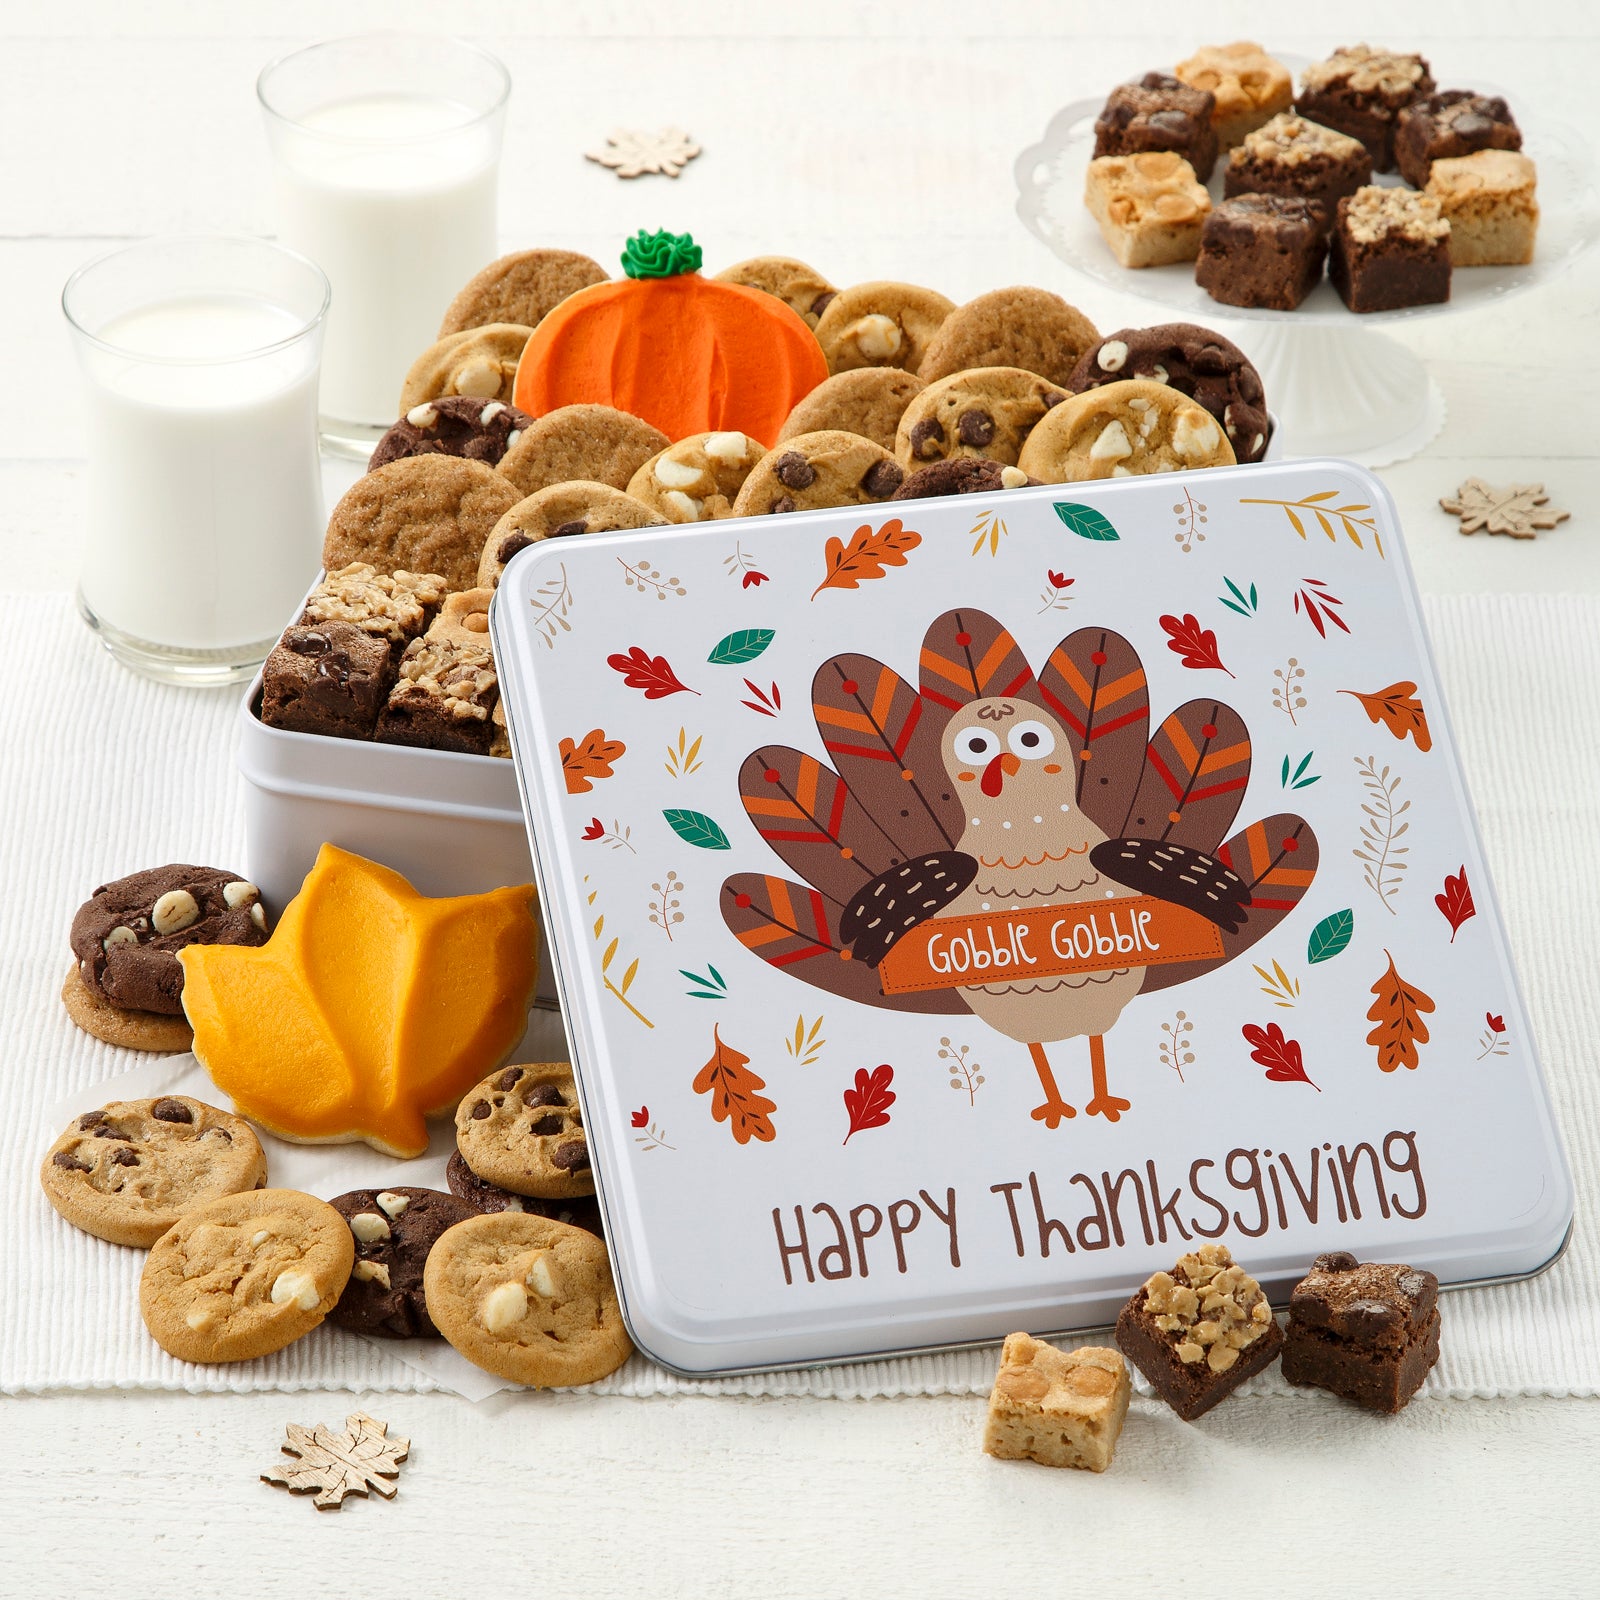 A Happy Thanksgiving them tin with a festive turkey on the lid. This tin is filled with an assortment of Nibblers®, brownie bites and a frosted pumpkin cookie. Surrounding the tin is an assortment of Nibblers®, brownie bites, and a frosted leaf cookie.